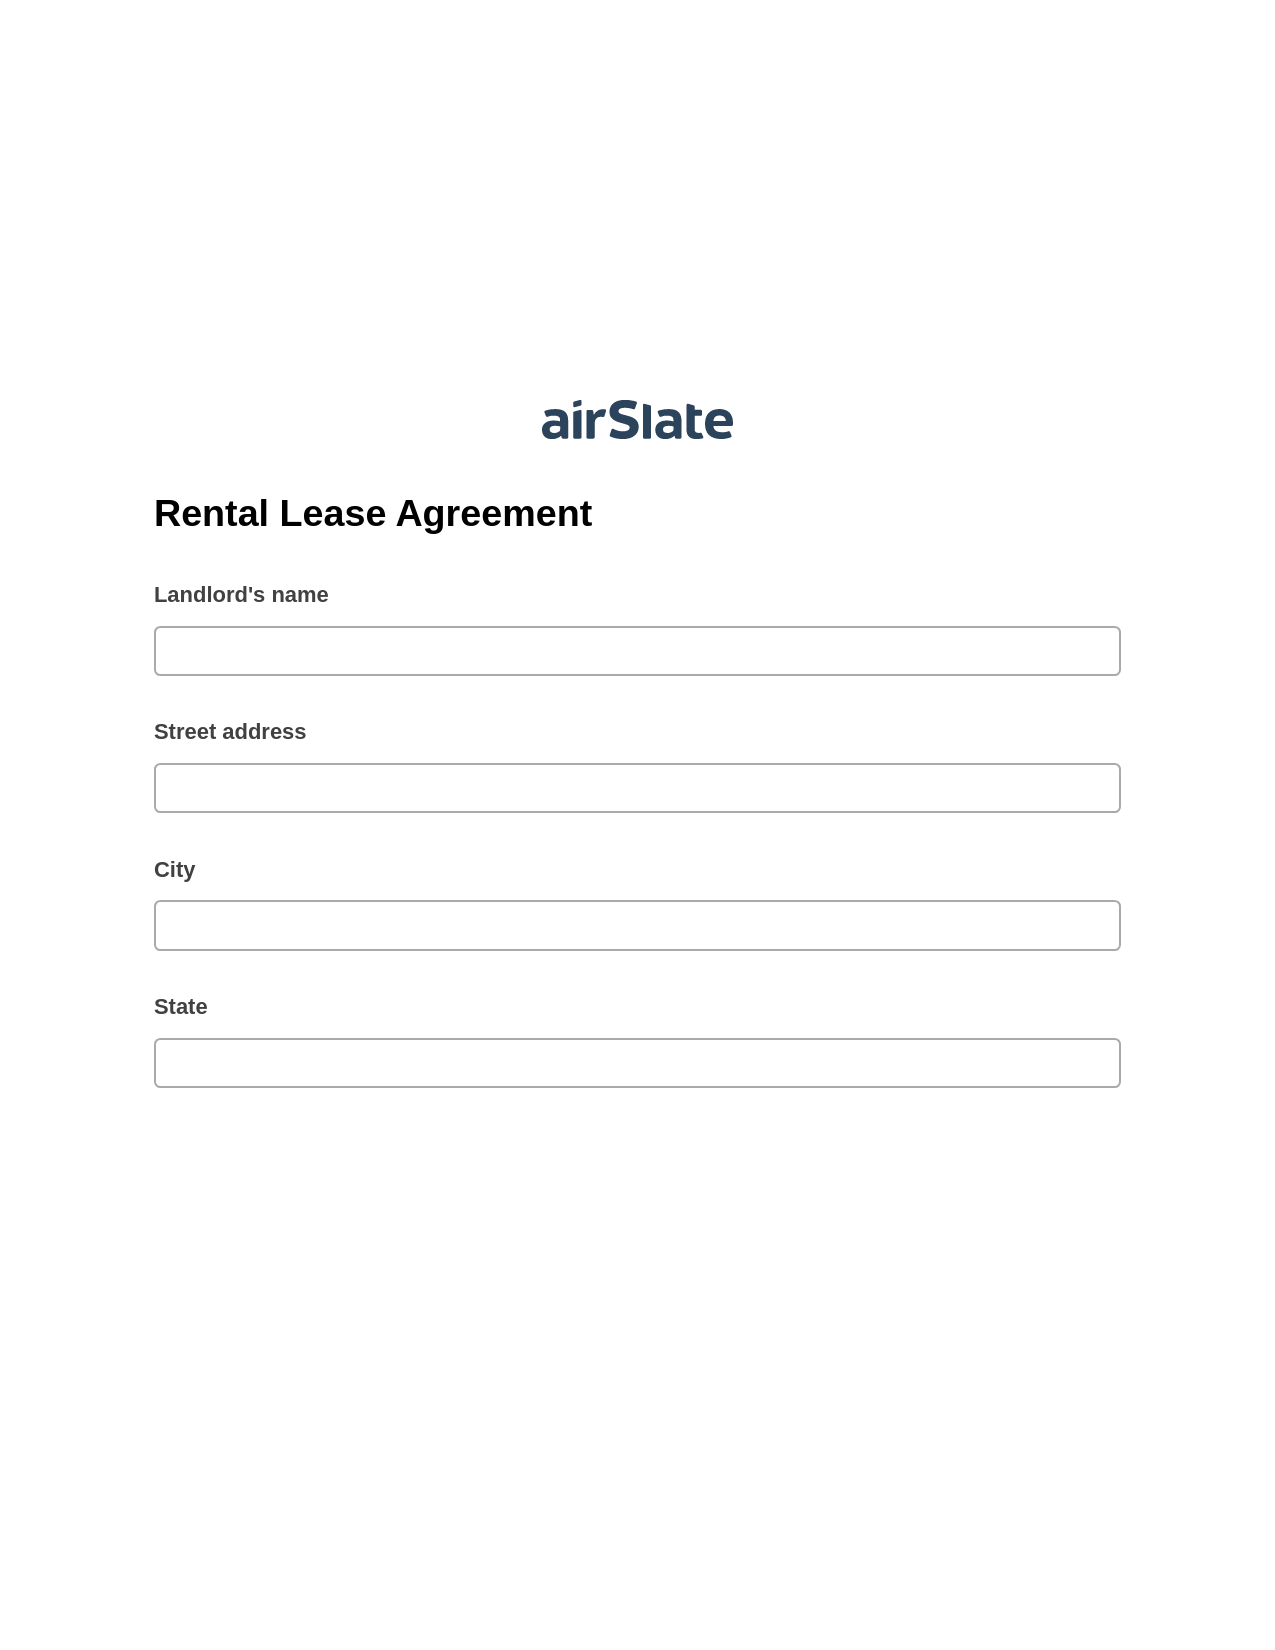 Multirole Rental Lease Agreement Pre-fill from CSV File Dropdown Options Bot, Create Slate from another Flow Bot, Export to MySQL Bot